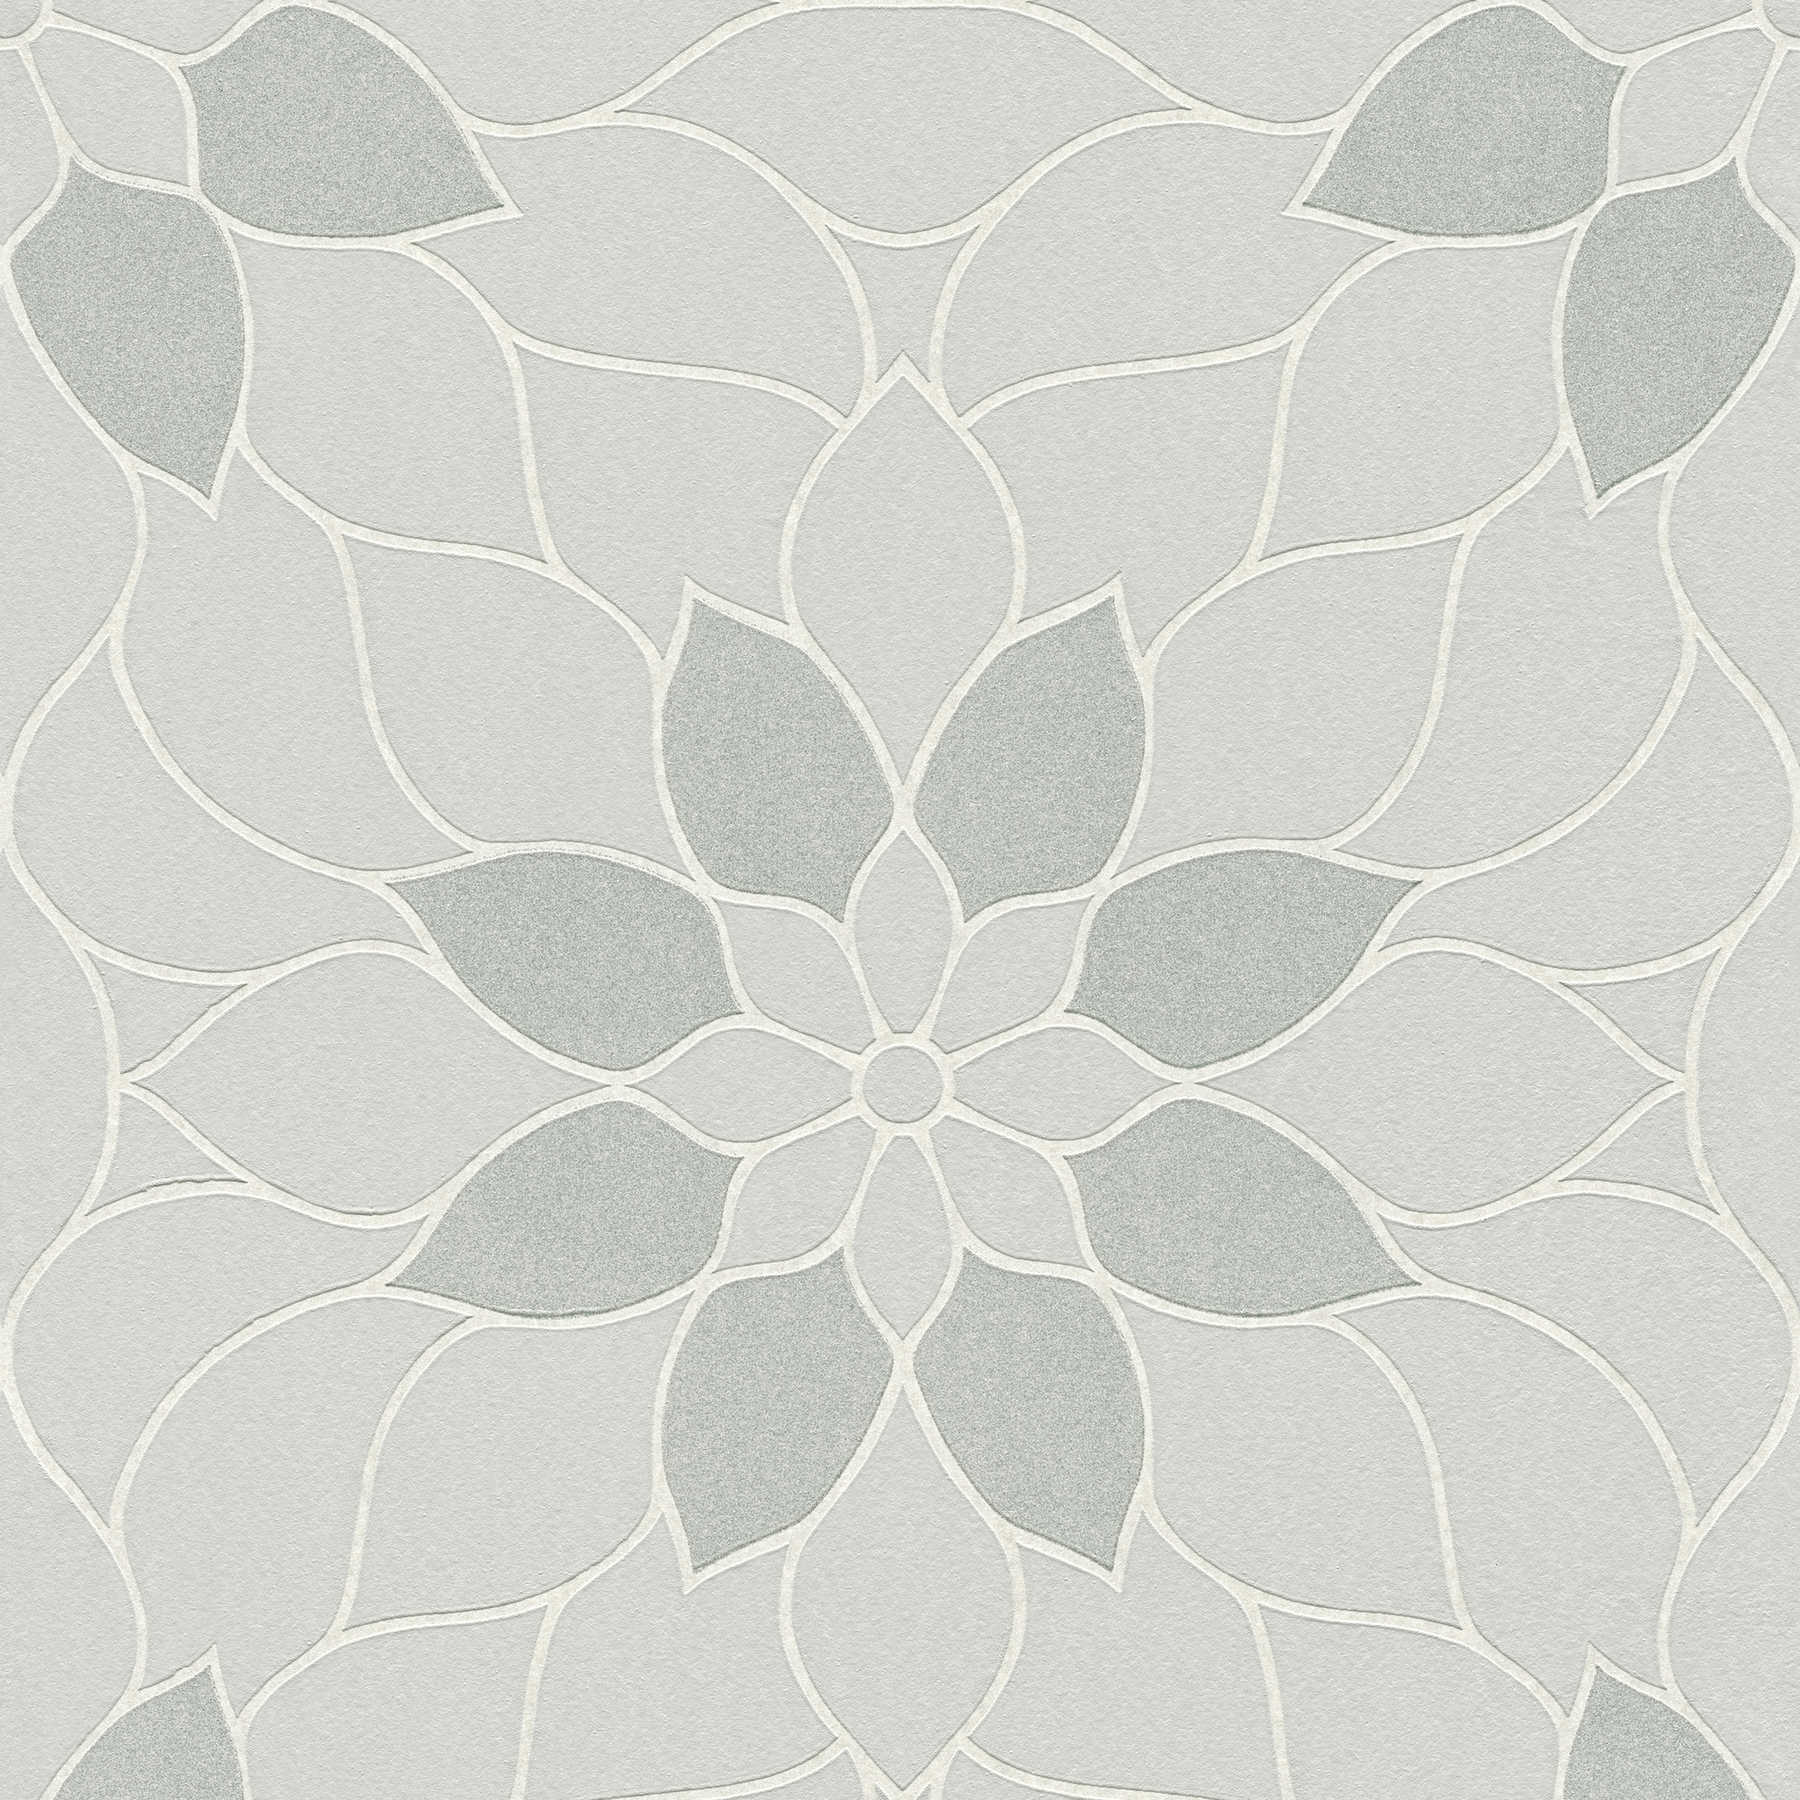 Graphic floral pattern with glitter effect - Grey
